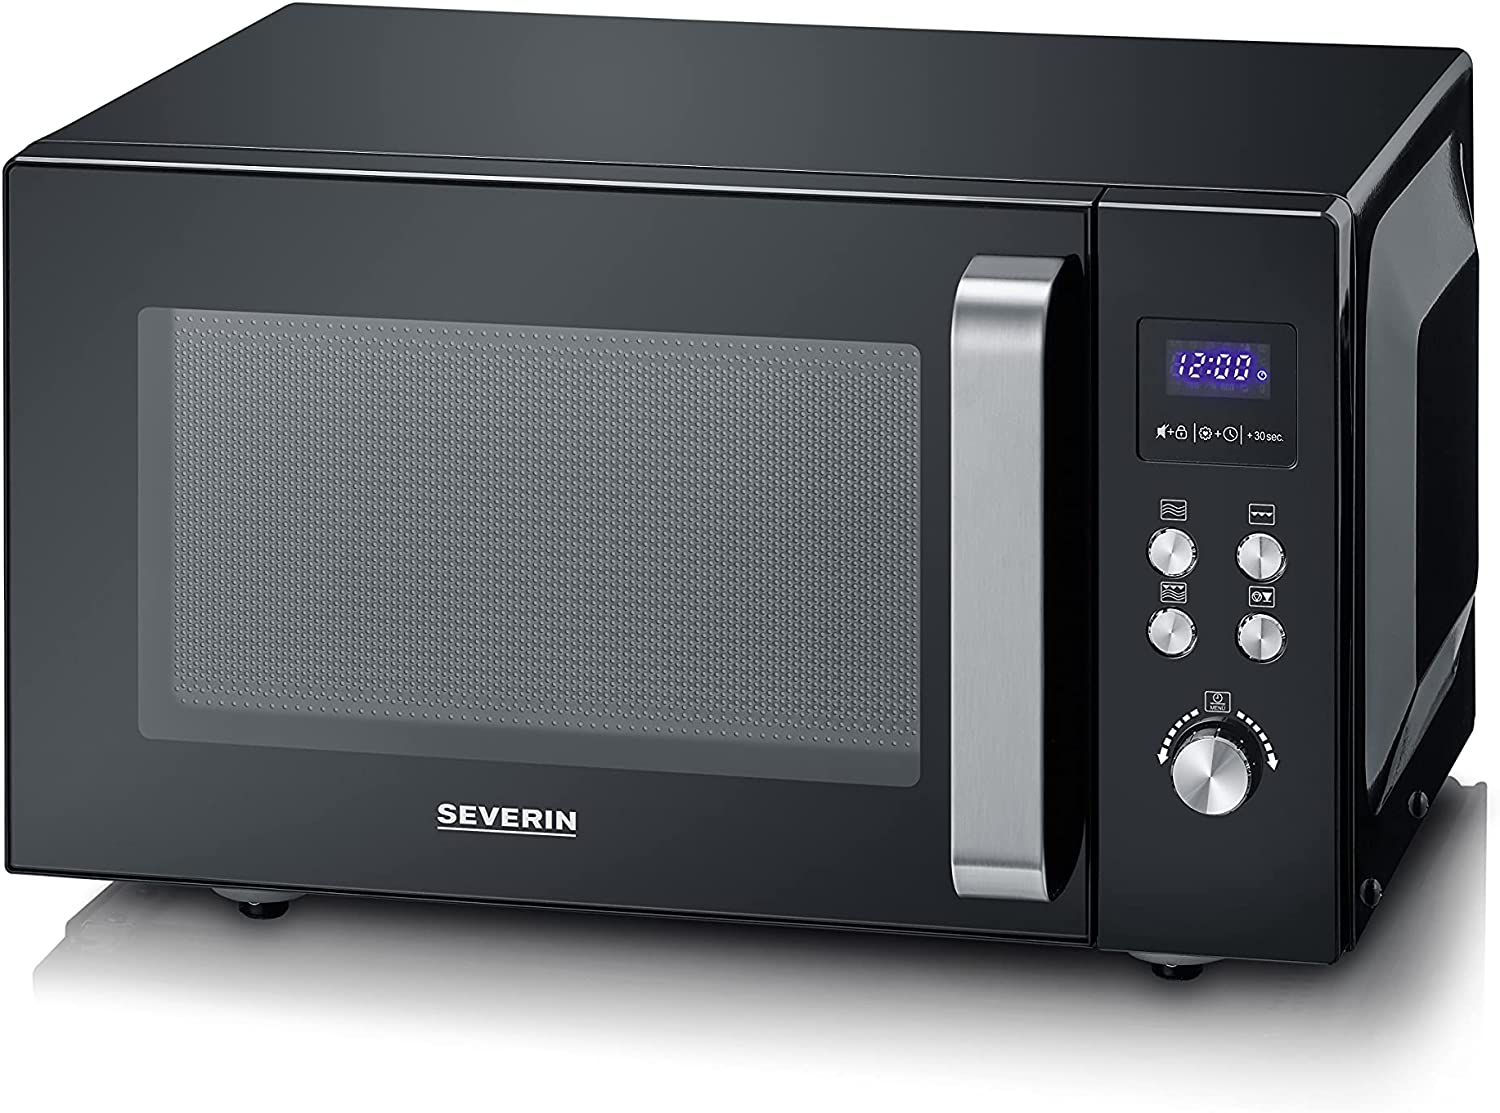 SEVERIN Inverter Microwave with Grill Function, Microwave Device for Even C